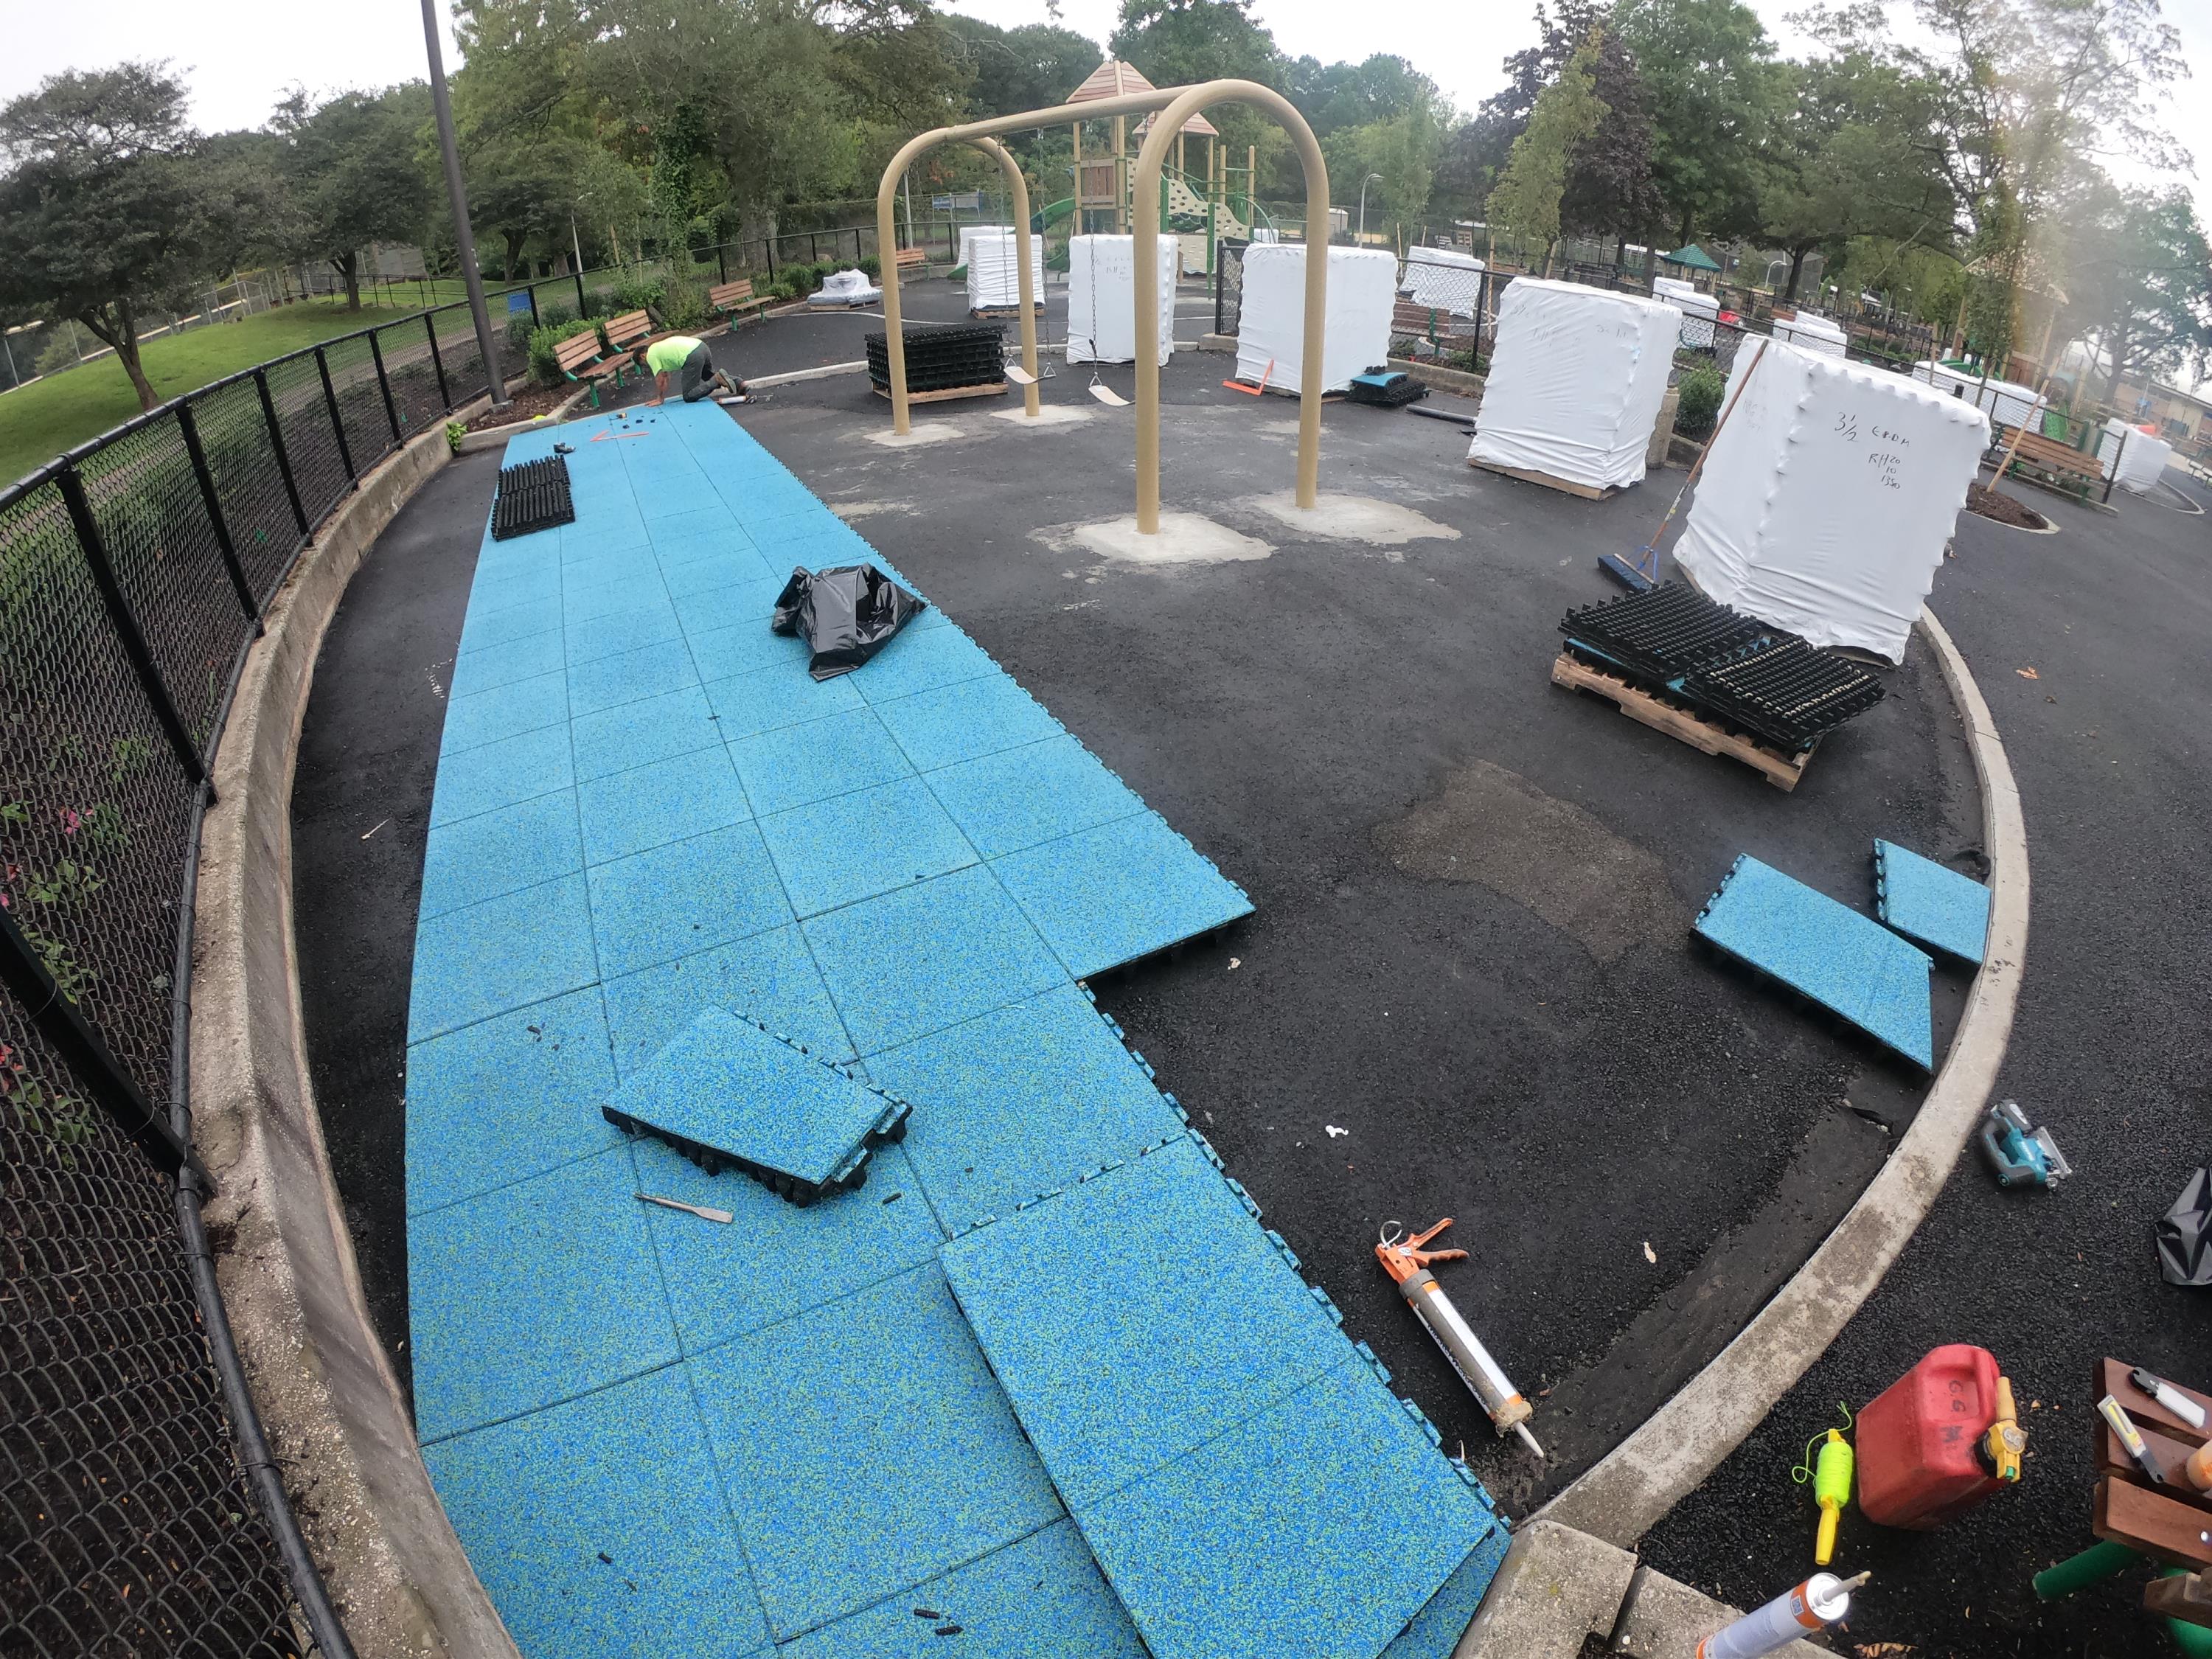 County Park Playground = Using TPV Top Tiles w50% Blue 45% Green 5% Black m